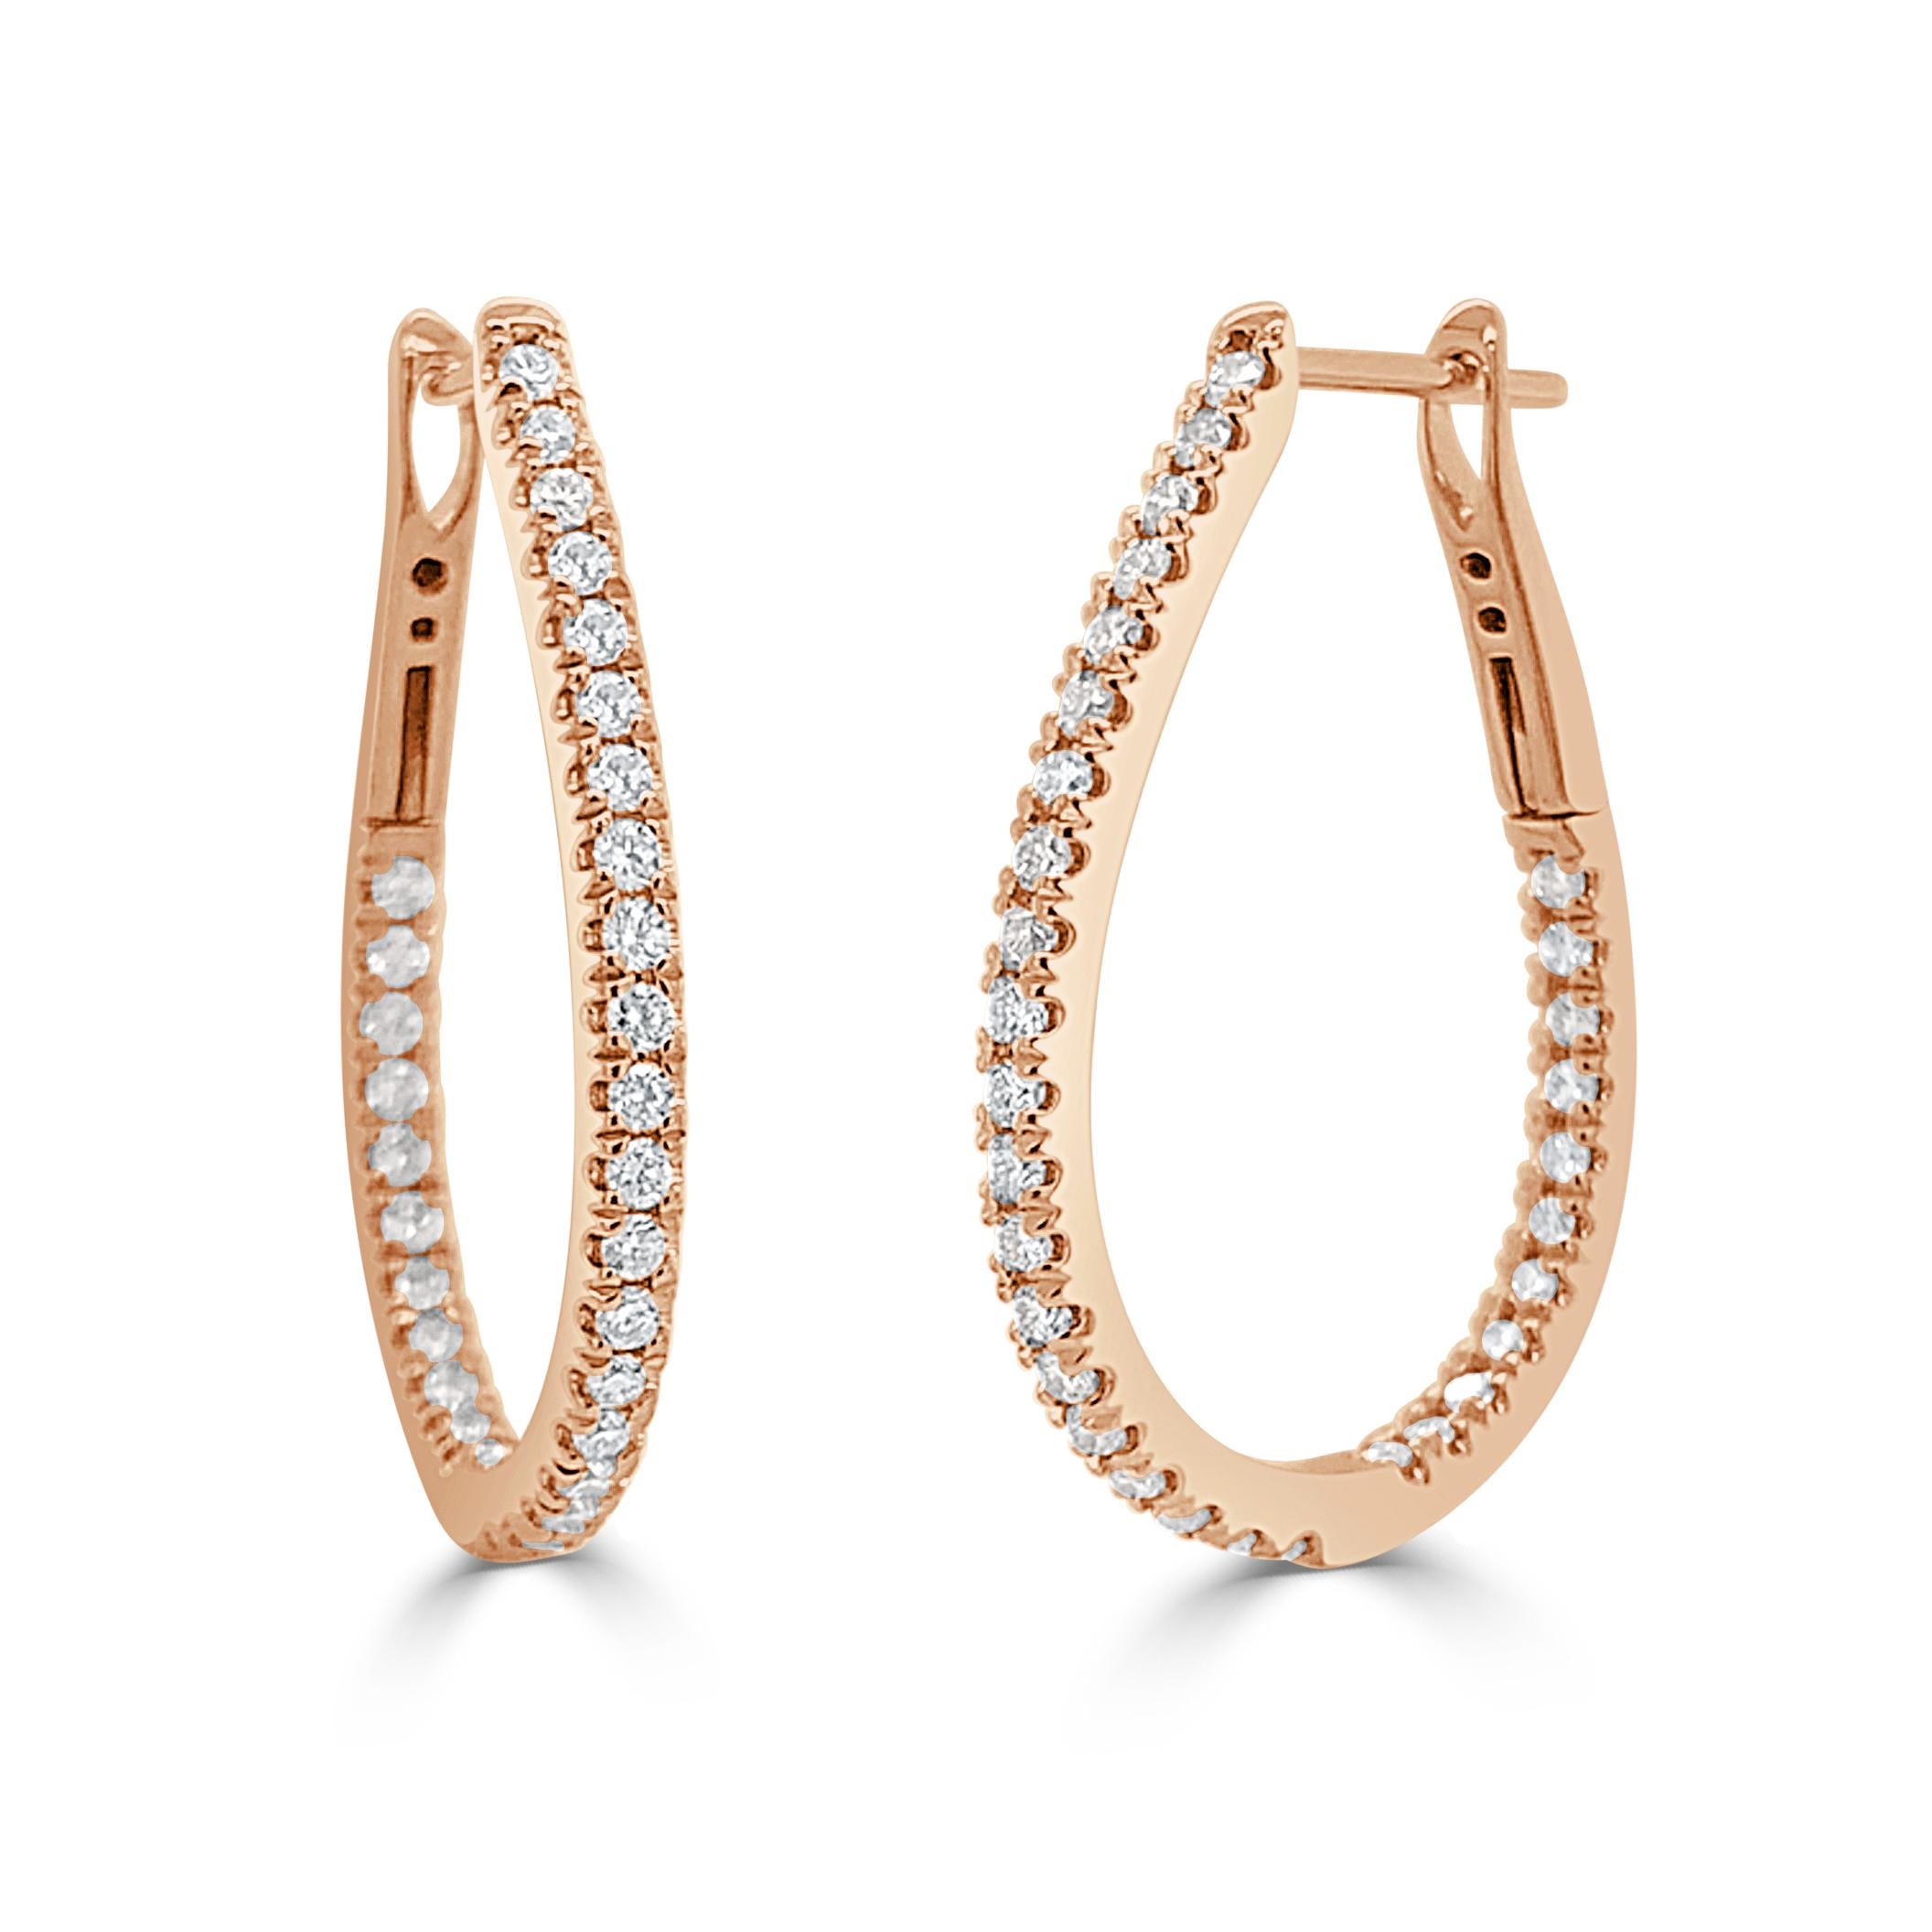 Quality Diamond Hoops: Made from real 14k gold and 82 glittering natural white approximately 1.30 ct. Certified diamonds, featuring a single row of white diamonds on the inside and outside of the earrings with a color and clarity of GH-SI. Earring